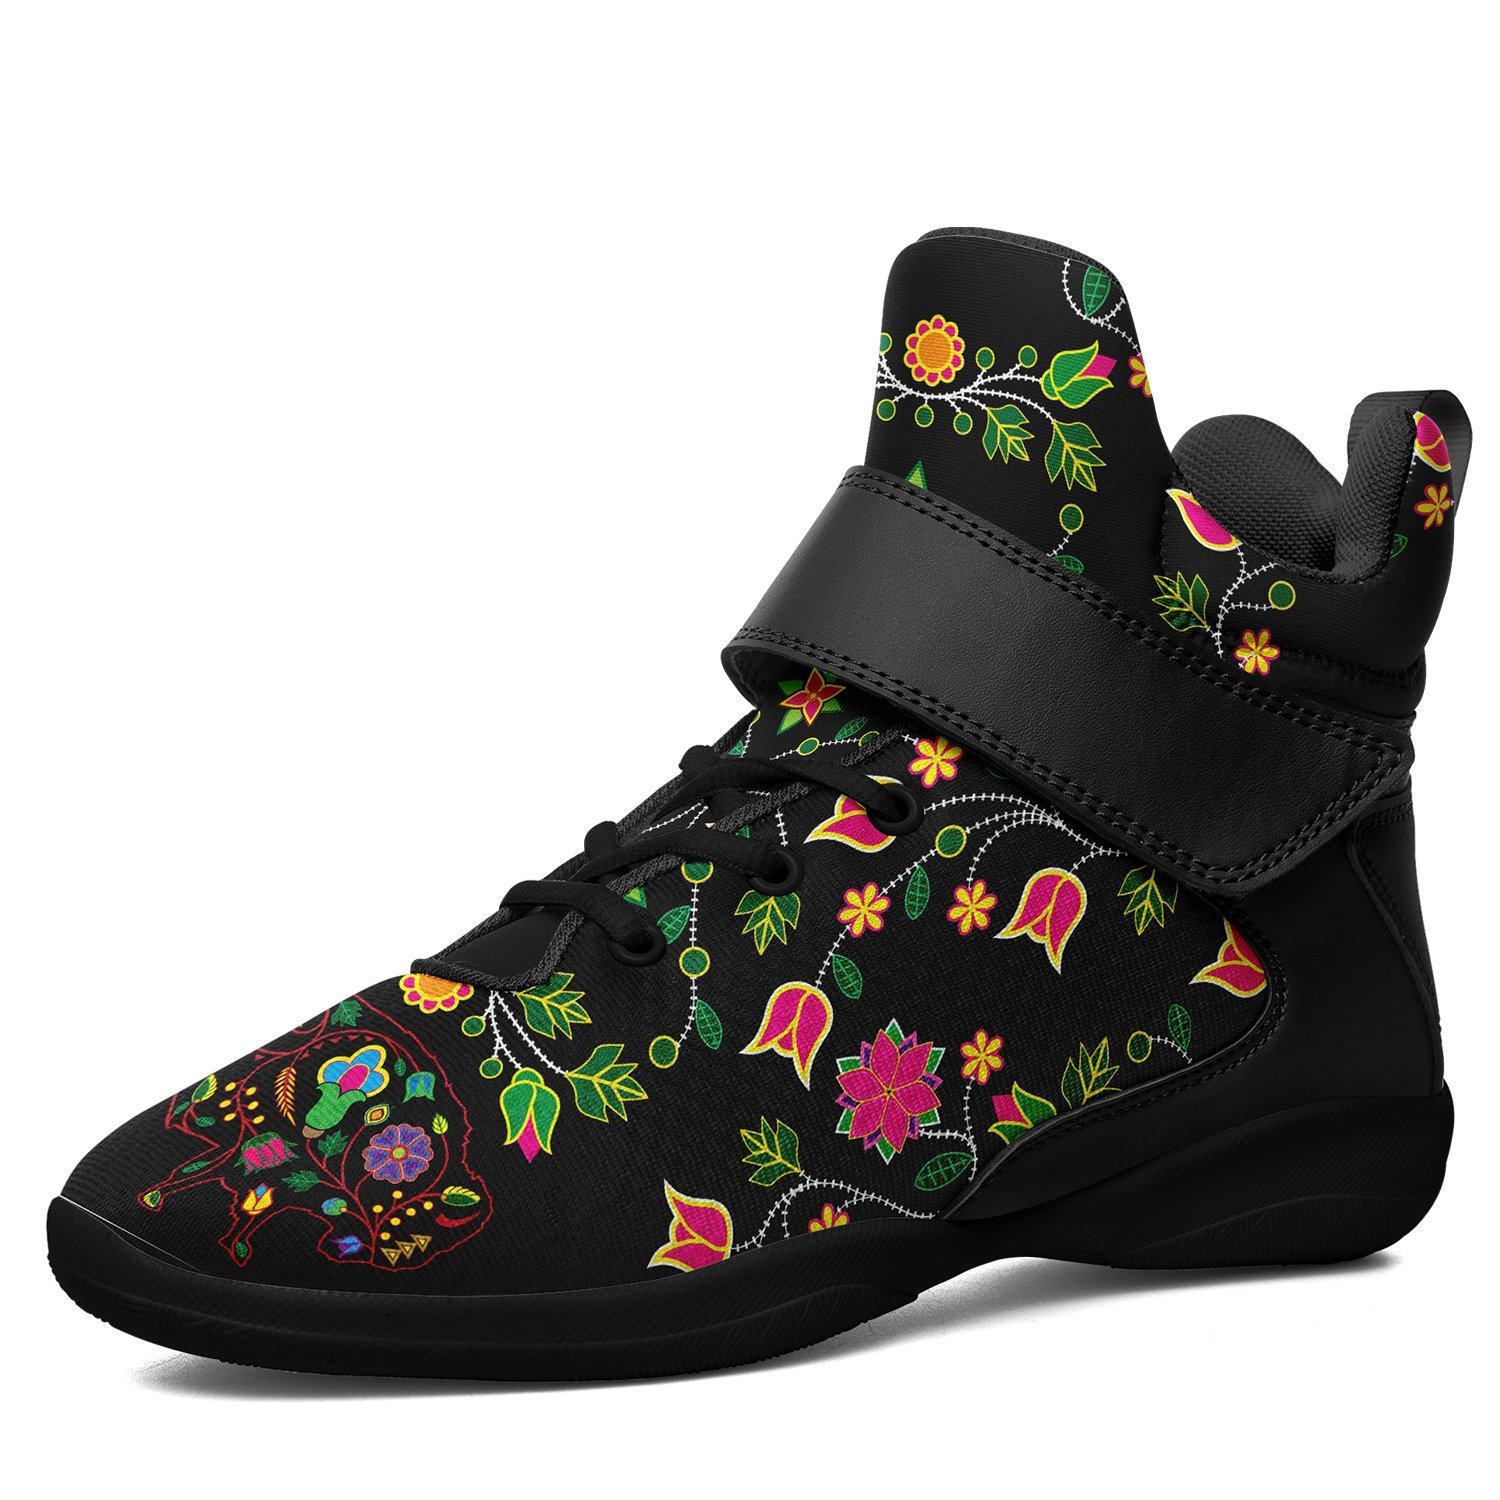 Floral Buffalo Ipottaa Basketball / Sport High Top Shoes - Black Sole 49 Dzine US Men 7 / EUR 40 Black Sole with Black Strap 